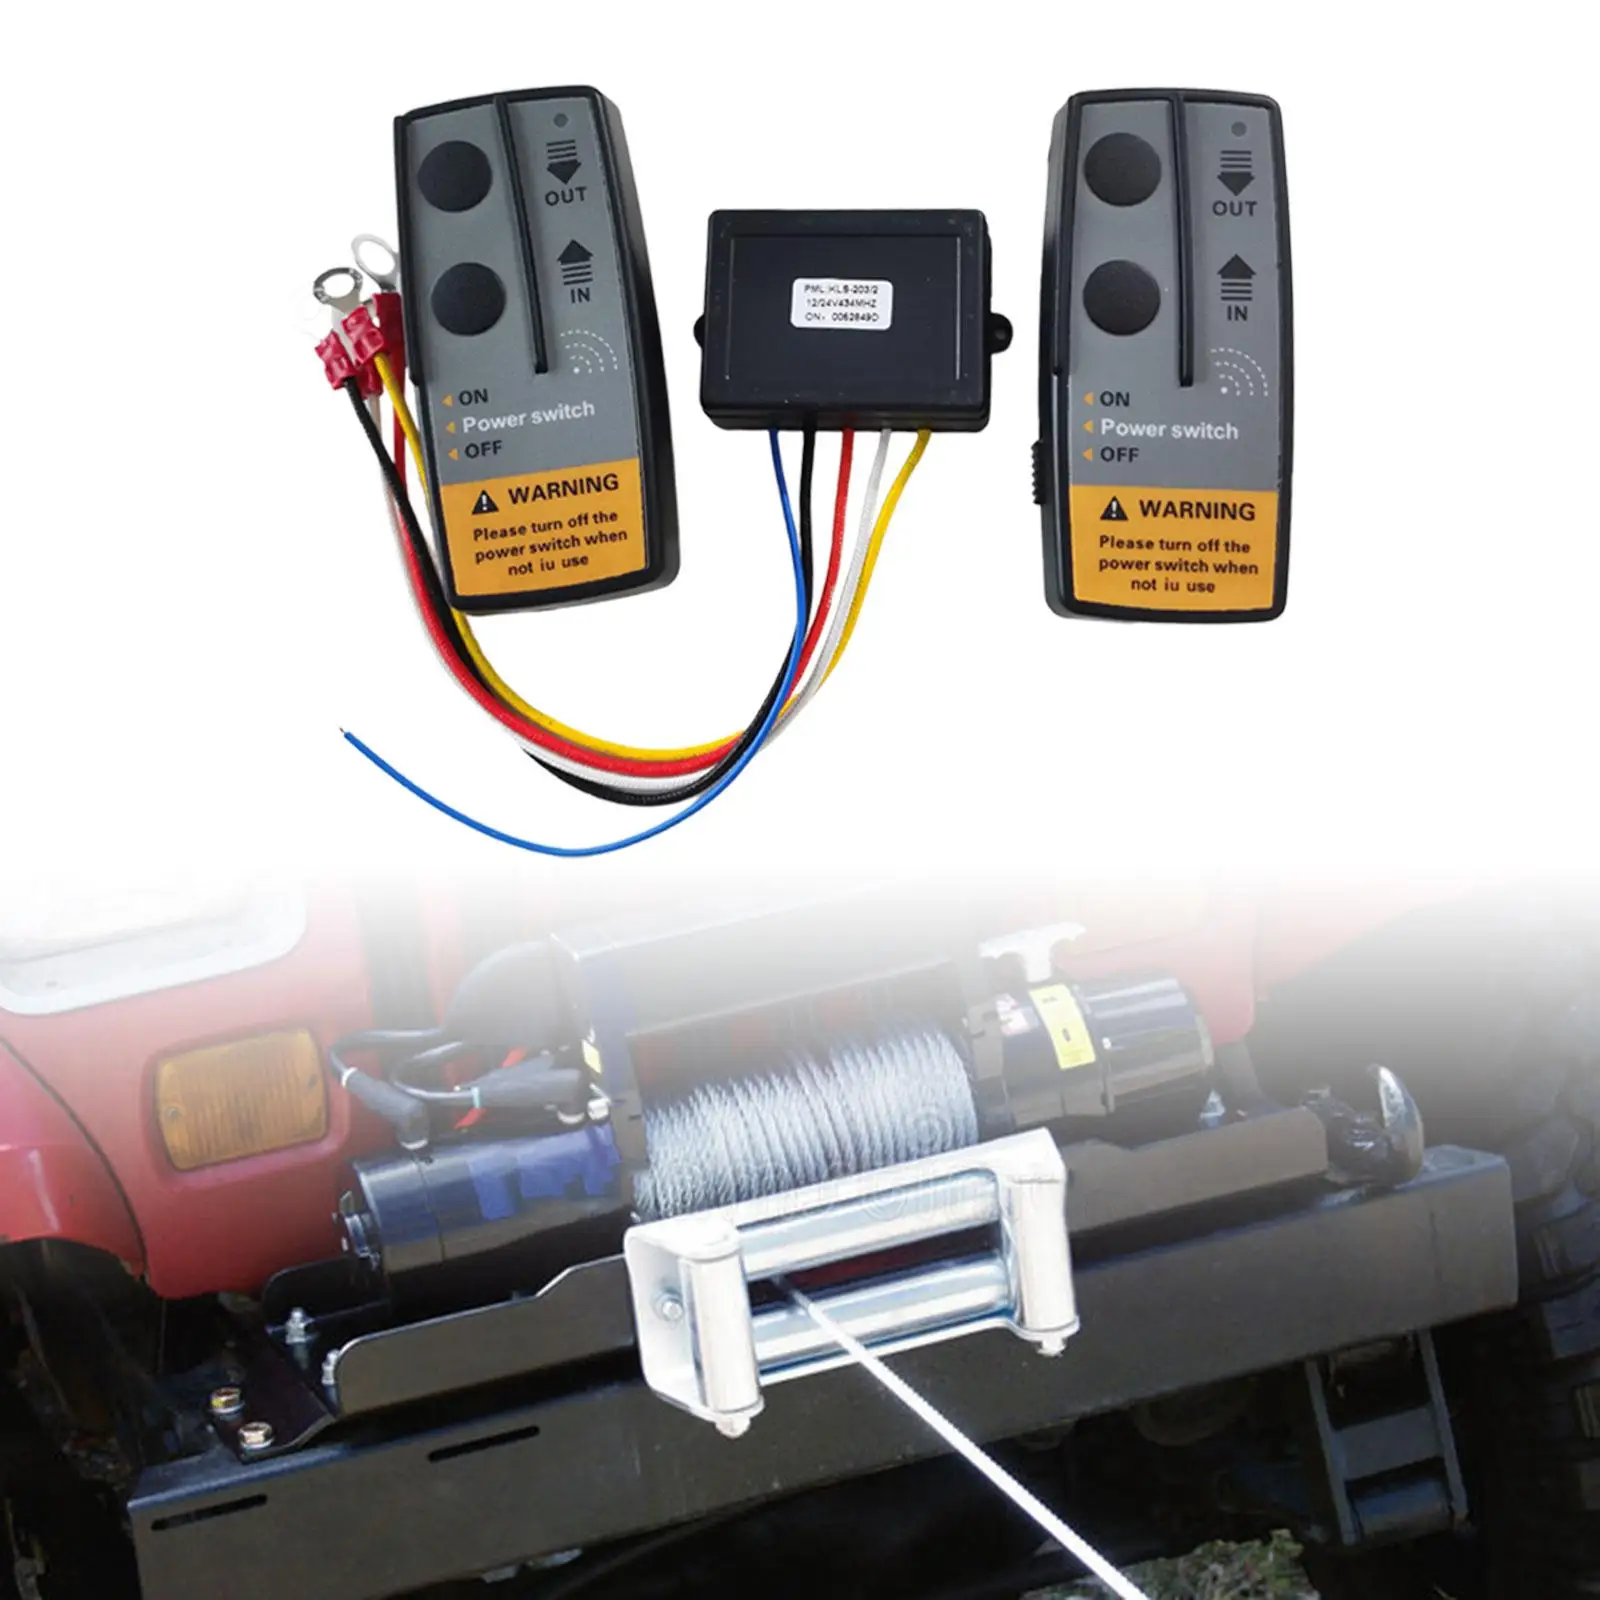 Wireless Winch Remote Control Kit Replacement with Indicator Light Recovery Wireless Winch Remote Control for Off Road